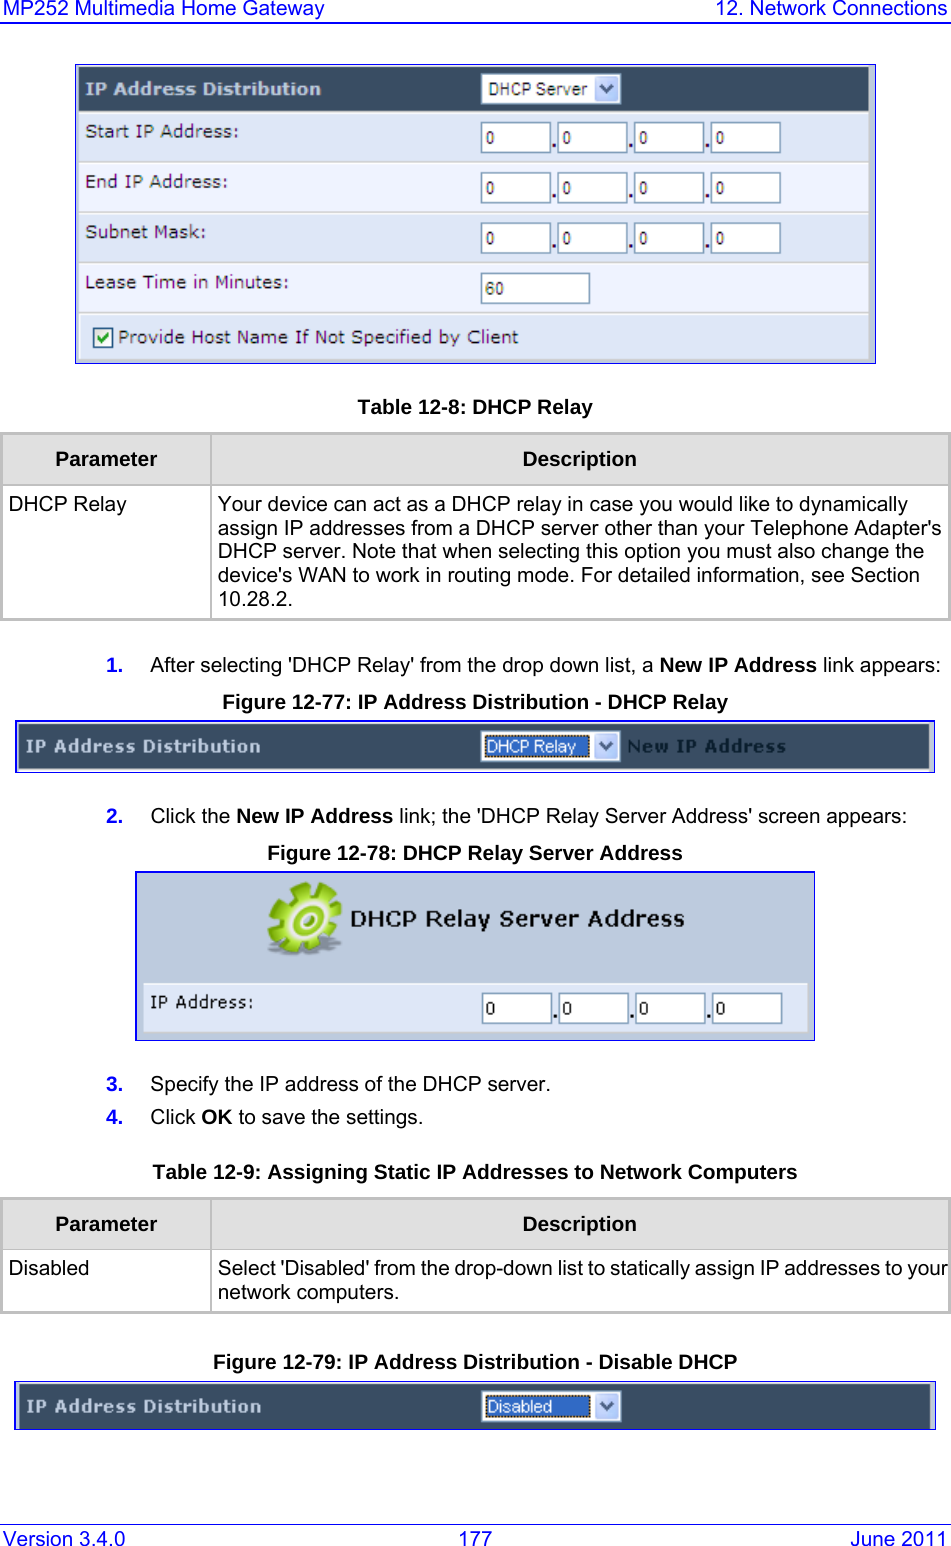 MP252 Multimedia Home Gateway  12. Network Connections Version 3.4.0  177  June 2011  Table 12-8: DHCP Relay Parameter  Description DHCP Relay Your device can act as a DHCP relay in case you would like to dynamically assign IP addresses from a DHCP server other than your Telephone Adapter&apos;s DHCP server. Note that when selecting this option you must also change the device&apos;s WAN to work in routing mode. For detailed information, see Section 10.28.2.  1.  After selecting &apos;DHCP Relay&apos; from the drop down list, a New IP Address link appears: Figure 12-77: IP Address Distribution - DHCP Relay  2.  Click the New IP Address link; the &apos;DHCP Relay Server Address&apos; screen appears: Figure 12-78: DHCP Relay Server Address  3.  Specify the IP address of the DHCP server. 4.  Click OK to save the settings. Table 12-9: Assigning Static IP Addresses to Network Computers Parameter  Description Disabled Select &apos;Disabled&apos; from the drop-down list to statically assign IP addresses to yournetwork computers.  Figure 12-79: IP Address Distribution - Disable DHCP   